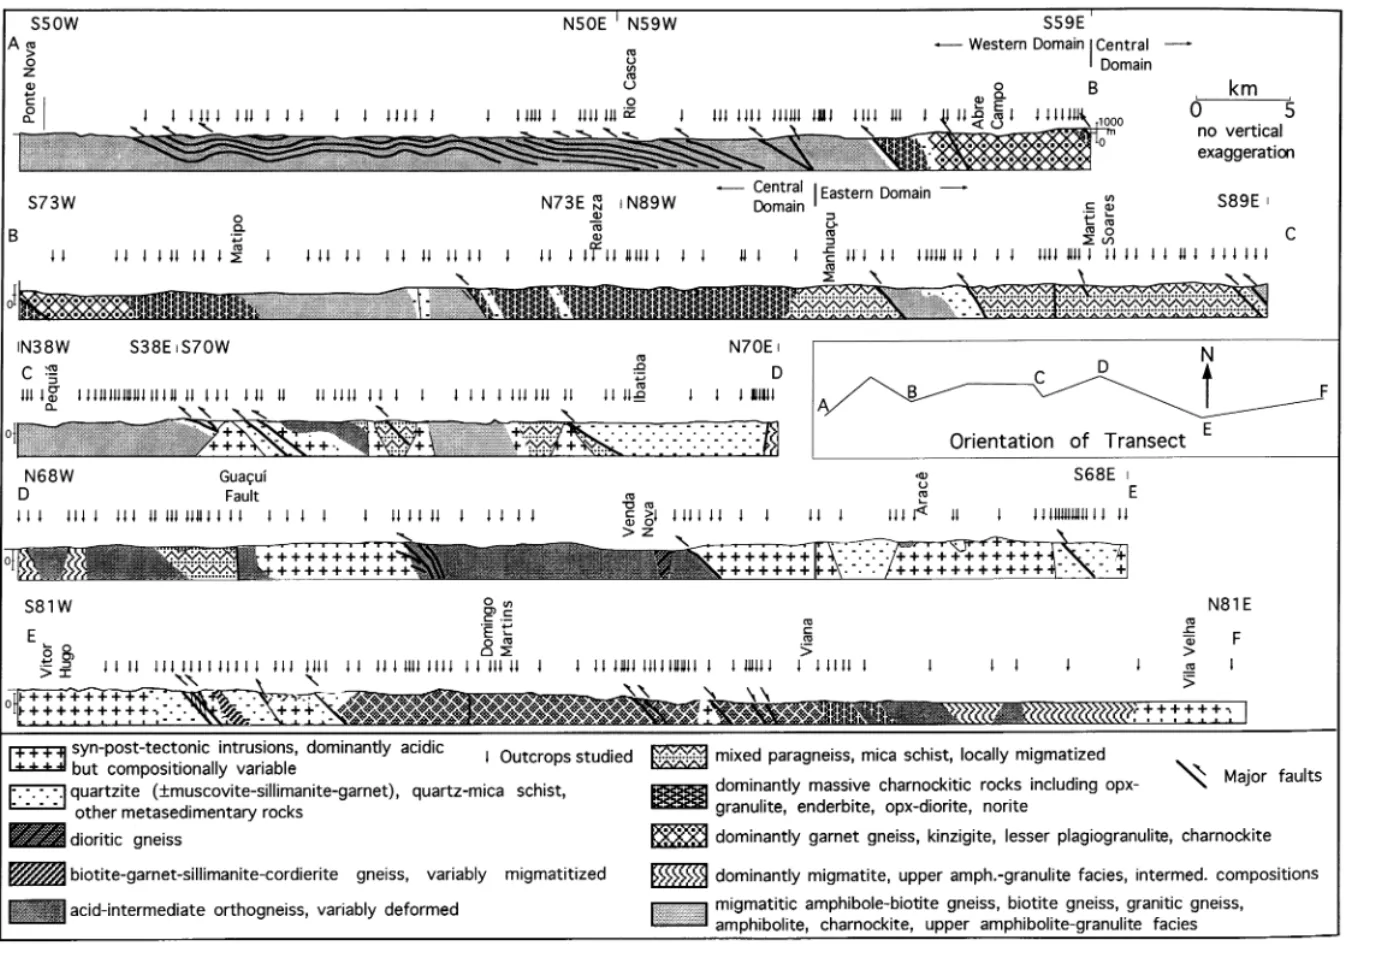 Fig. 4. Geological transect cross-section from Ponte Nova to Vila Velha showing major rock units and important faults